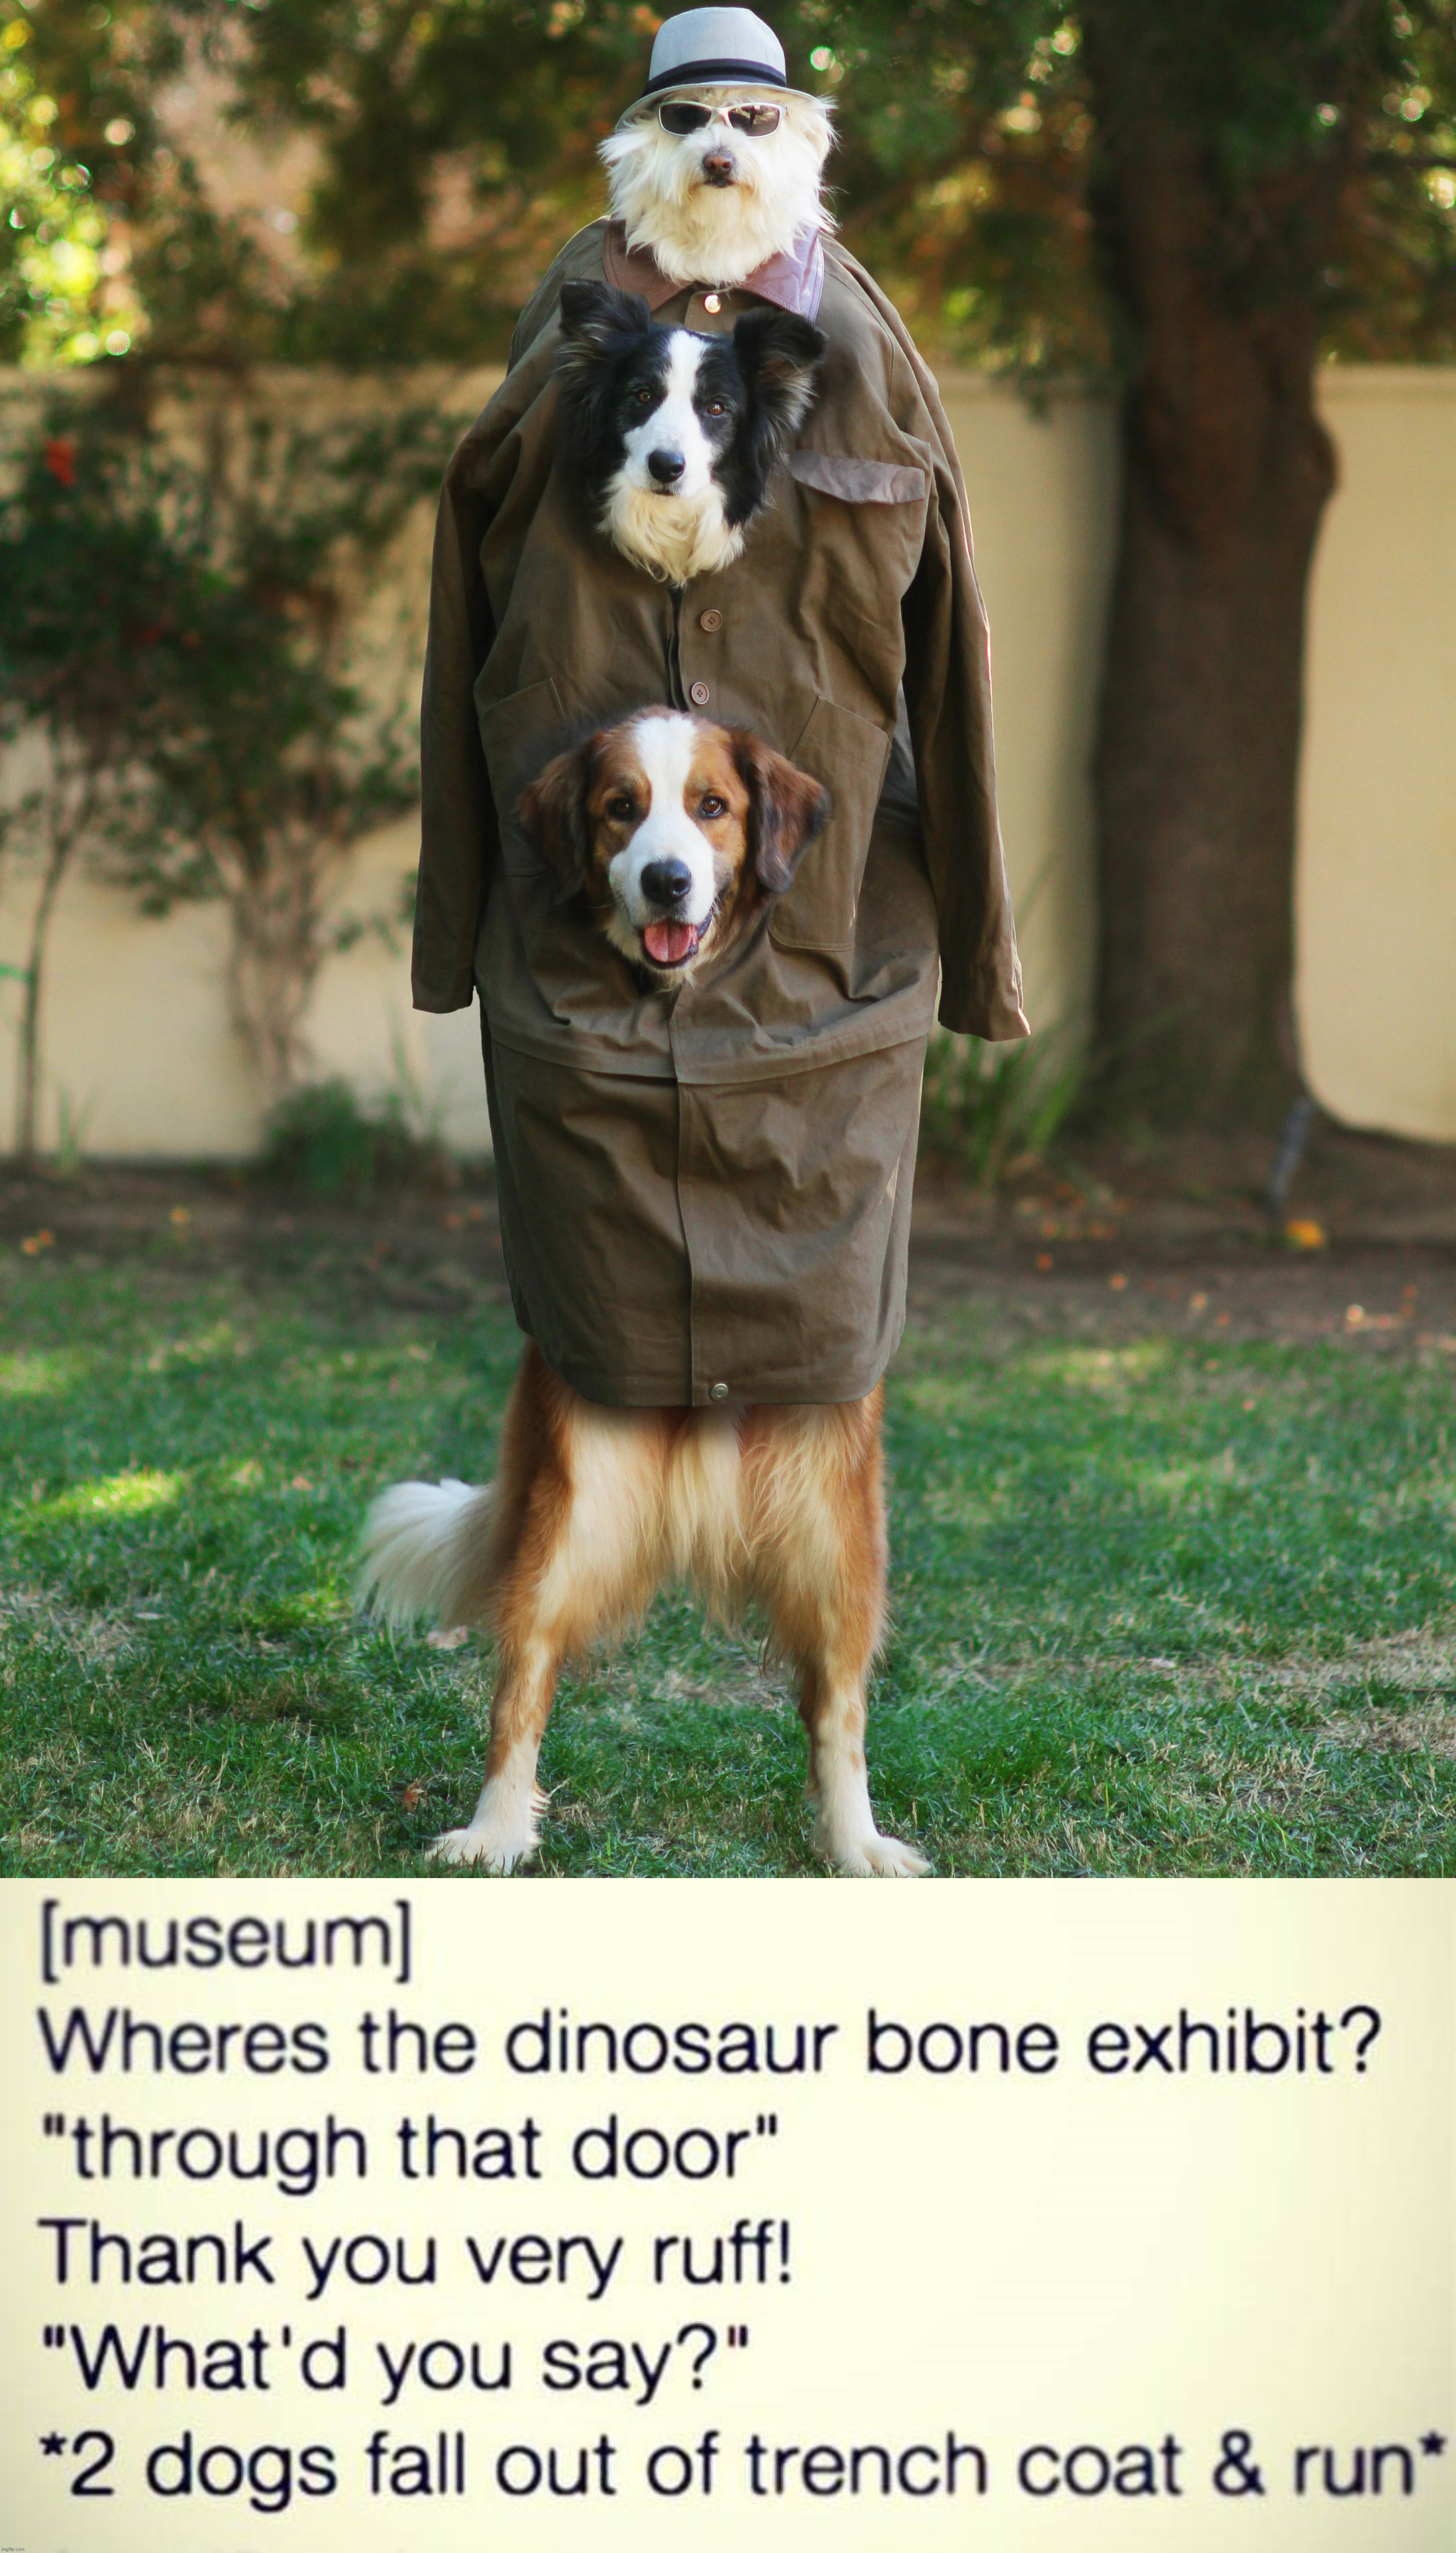 Dogs in a trench coat is so funny | image tagged in dogs,funny meme,trench coat,museum | made w/ Imgflip meme maker